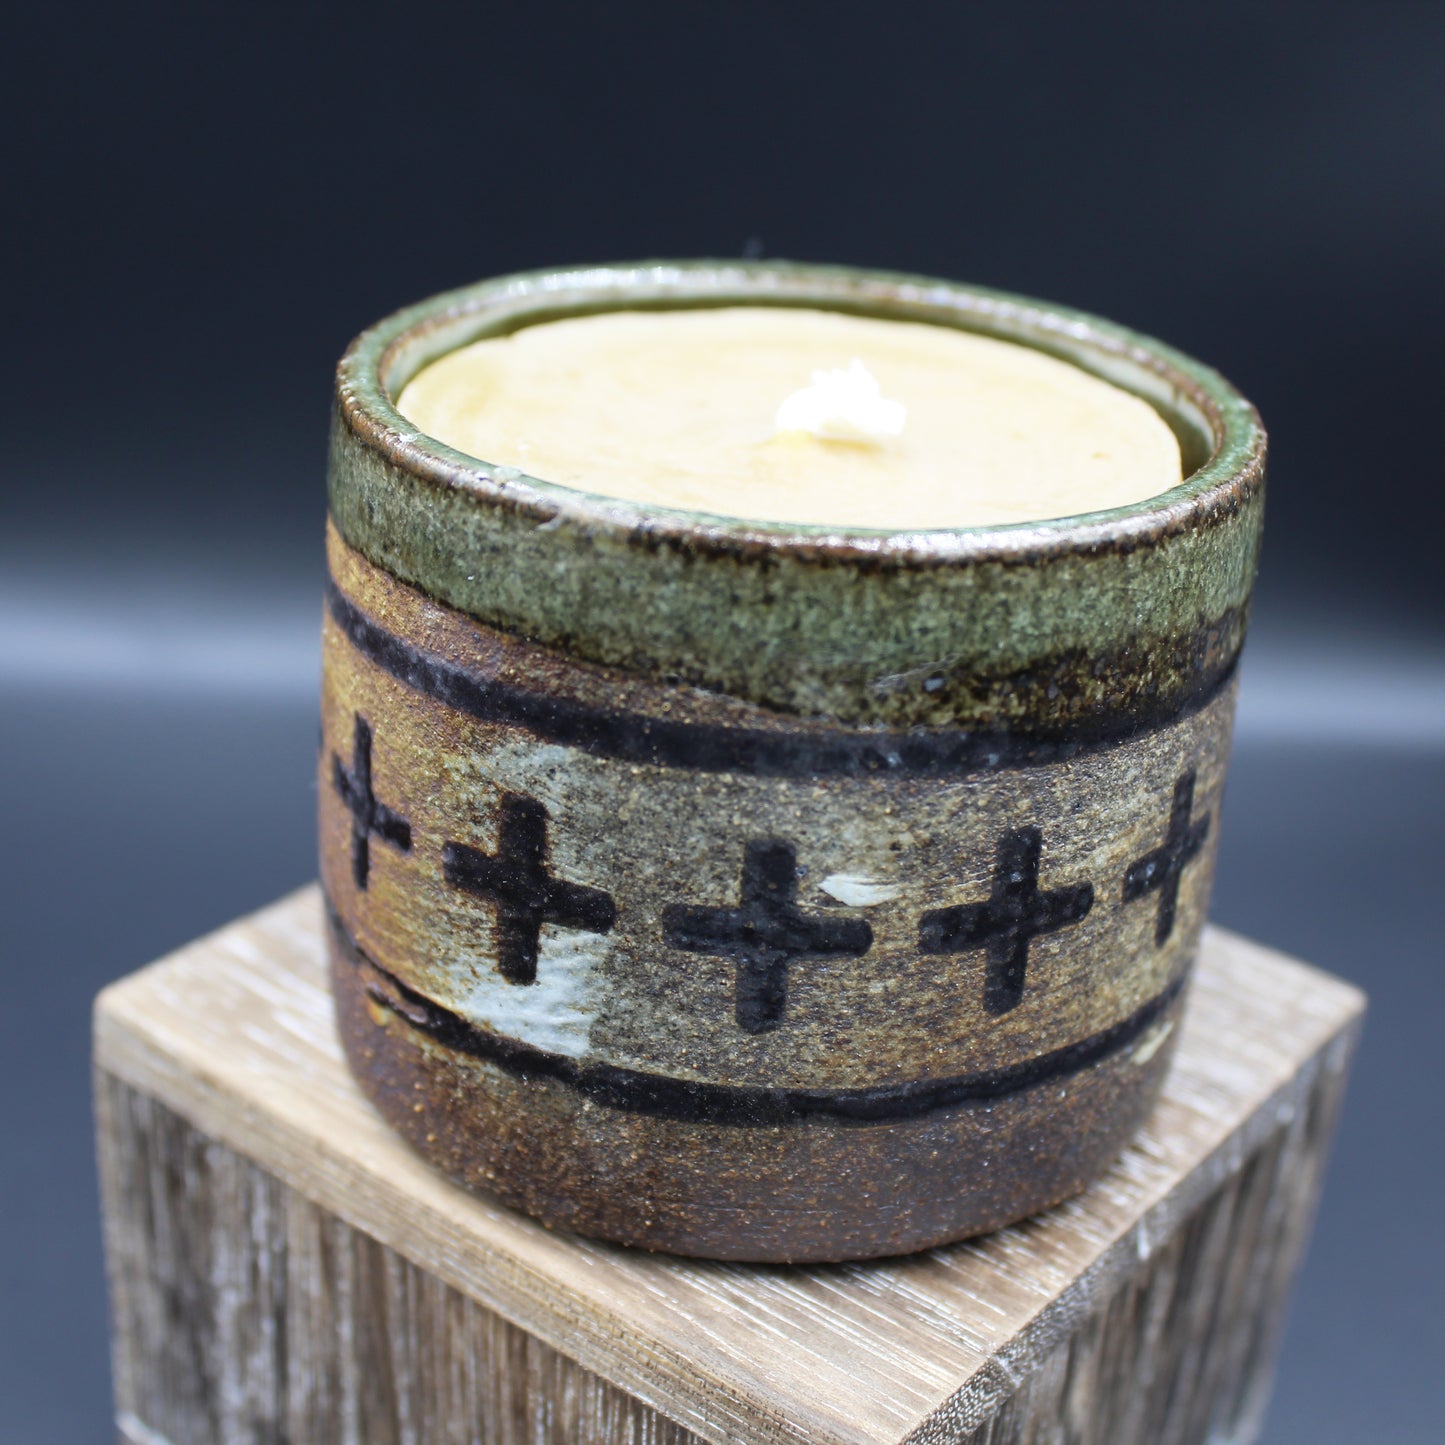 Sacred Wheel Pottery (Sid Enck) - Candles in reusable pot